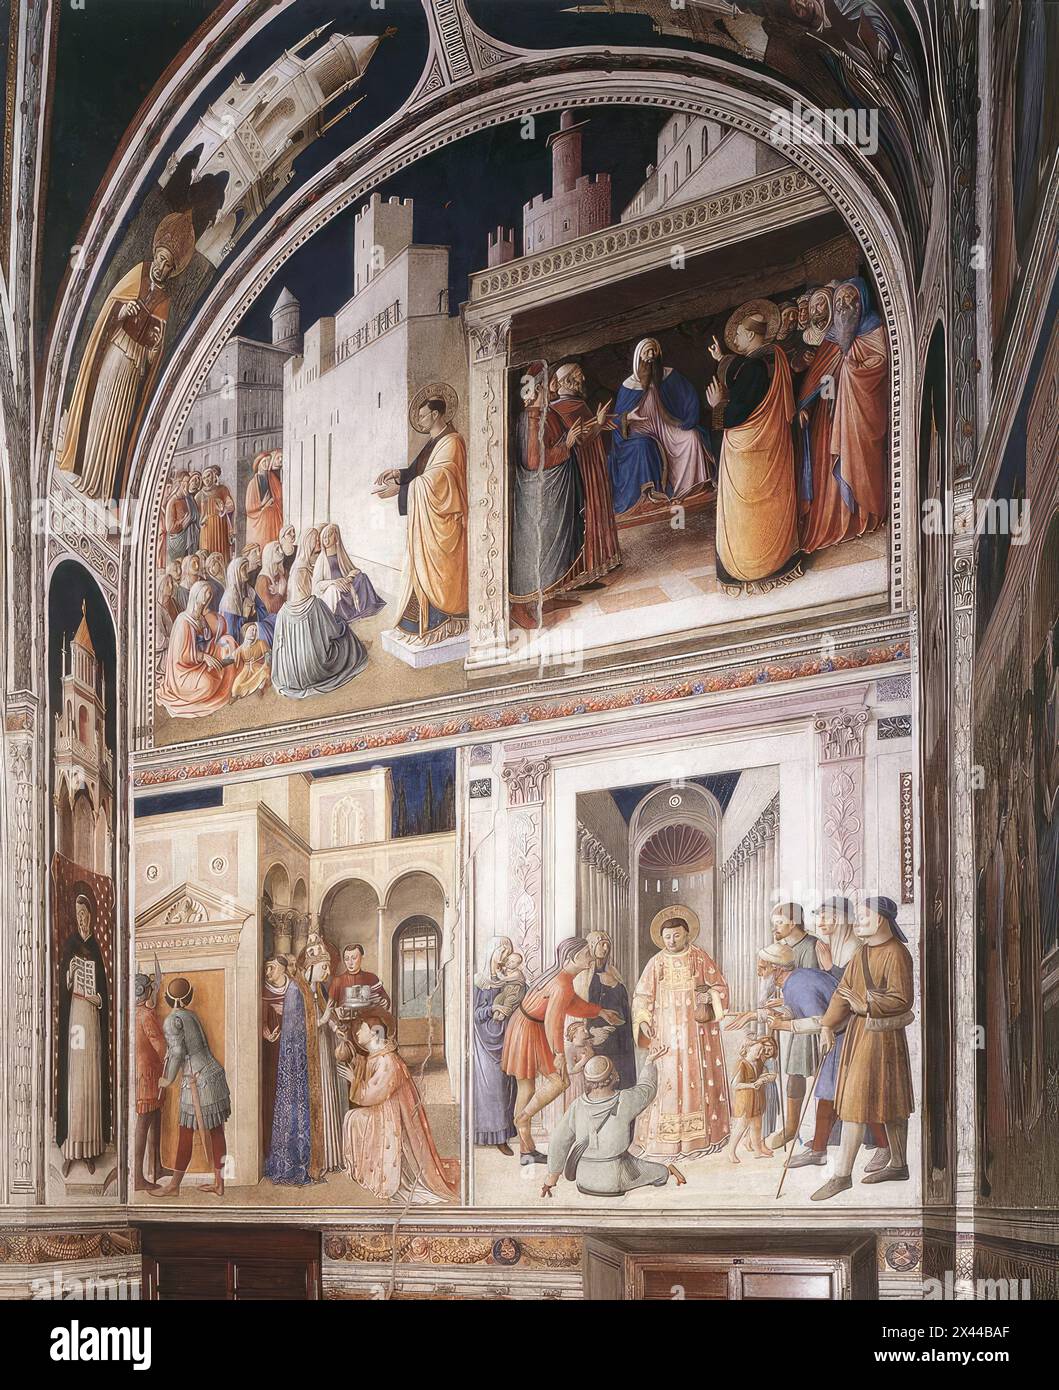 ANGELICO, Fra (b. ca. 1400, Vicchio nell Mugello, d. 1455, Roma)  Scenes from the Lives of Sts Lawrence and Stephen 1447-49 Fresco Cappella Niccolina, Palazzi Pontifici, Vatican  Fra Angelico was entrusted with a number of commissions for the Vatican Palace. The one that involved the most work was the decoration of the small room in the ancient tower of Pope Innocent III that Nicholas V turned into his private chapel, a rectangular space with a groin vault. The floor installed at this time survives. It displays the emblem of Nicholas V, a radiant sun. The frescoes show scenes from the lives of Stock Photo